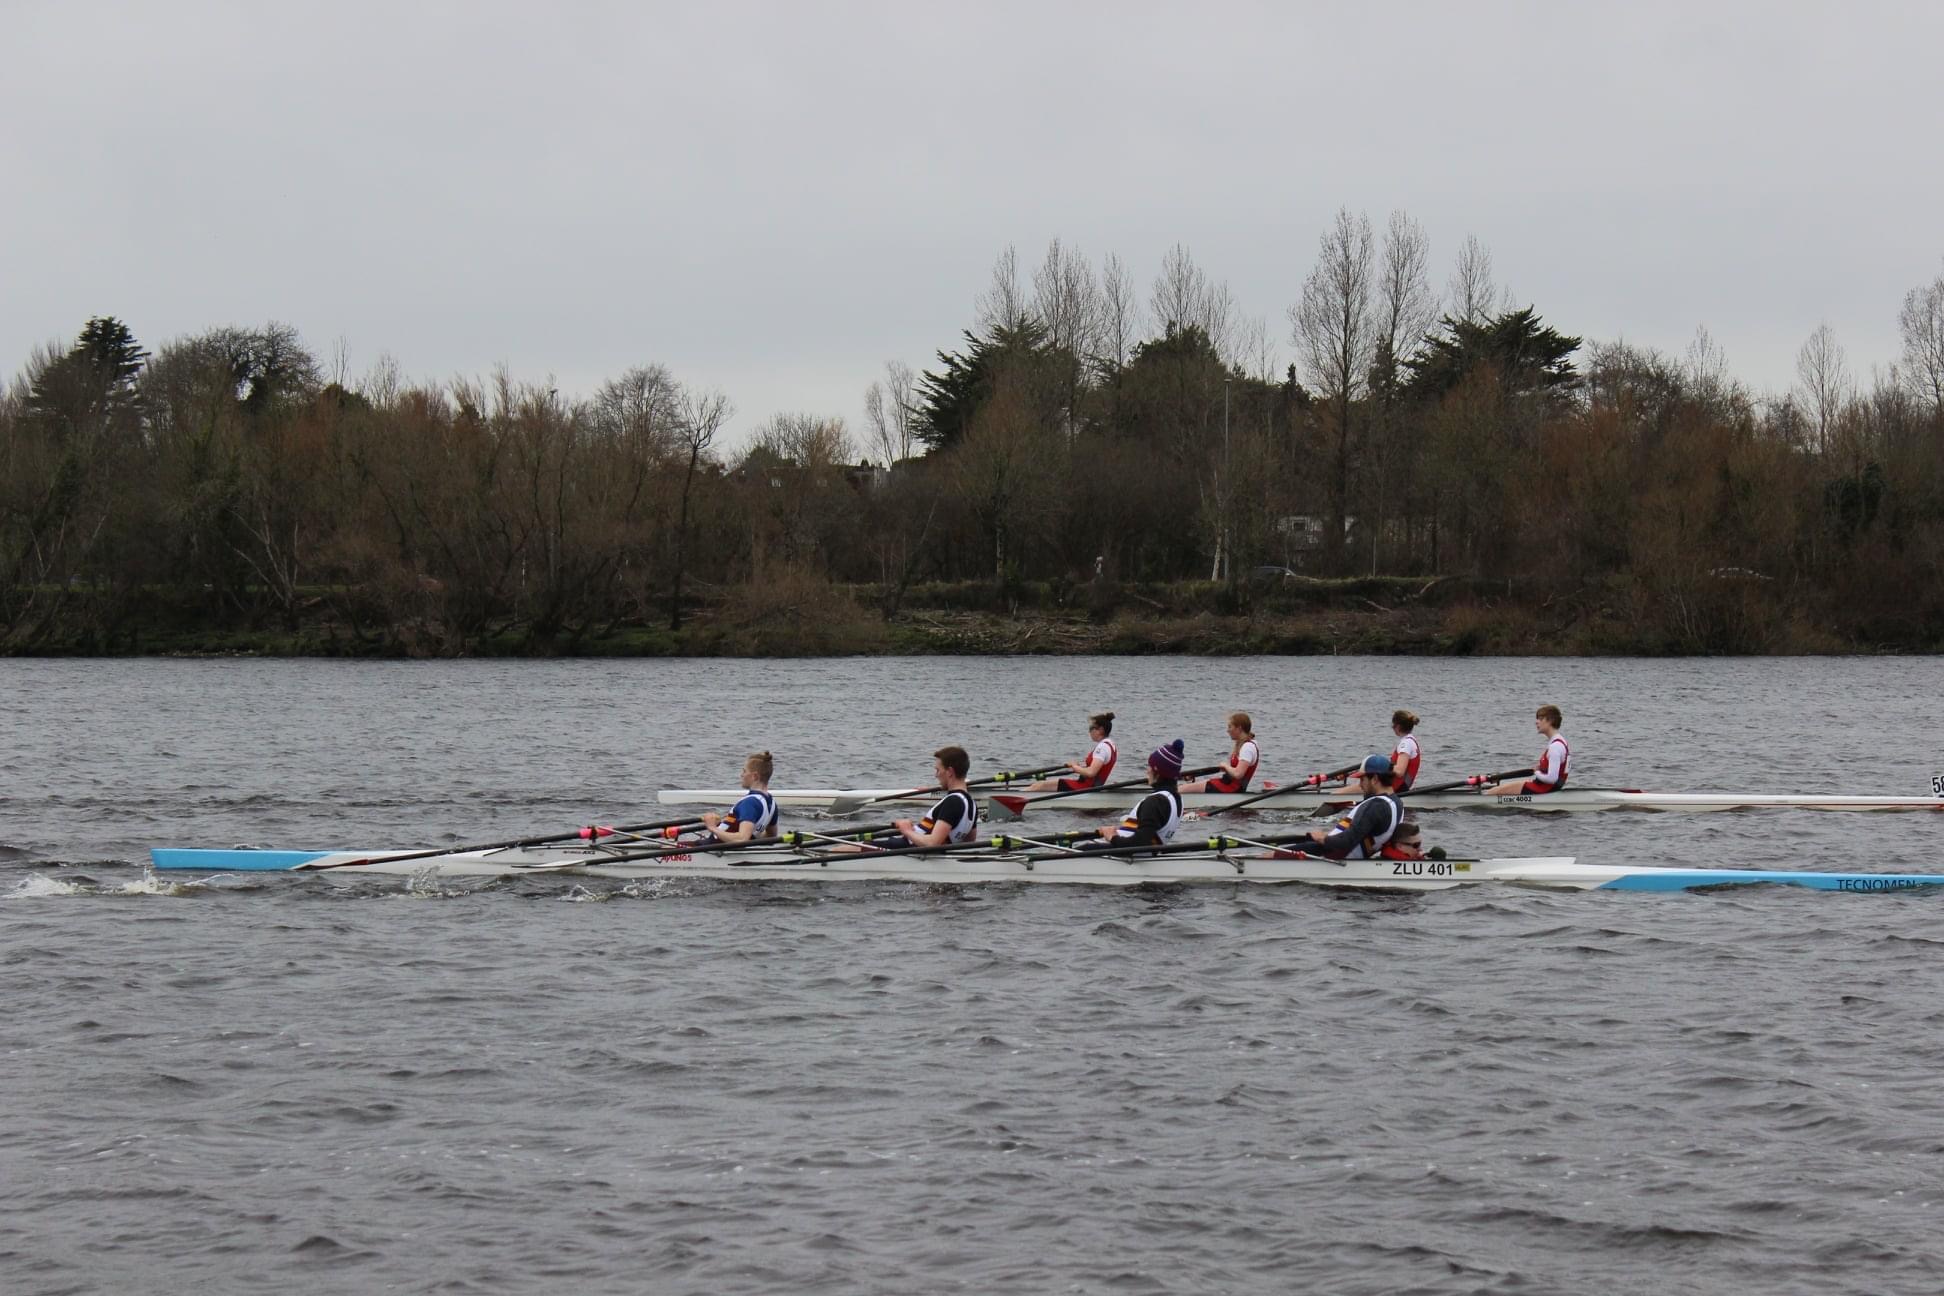 The City Head of the River time trial event returns with St Michael's Rowing Club hosting the event for the 3rd time this Saturday, March 18 